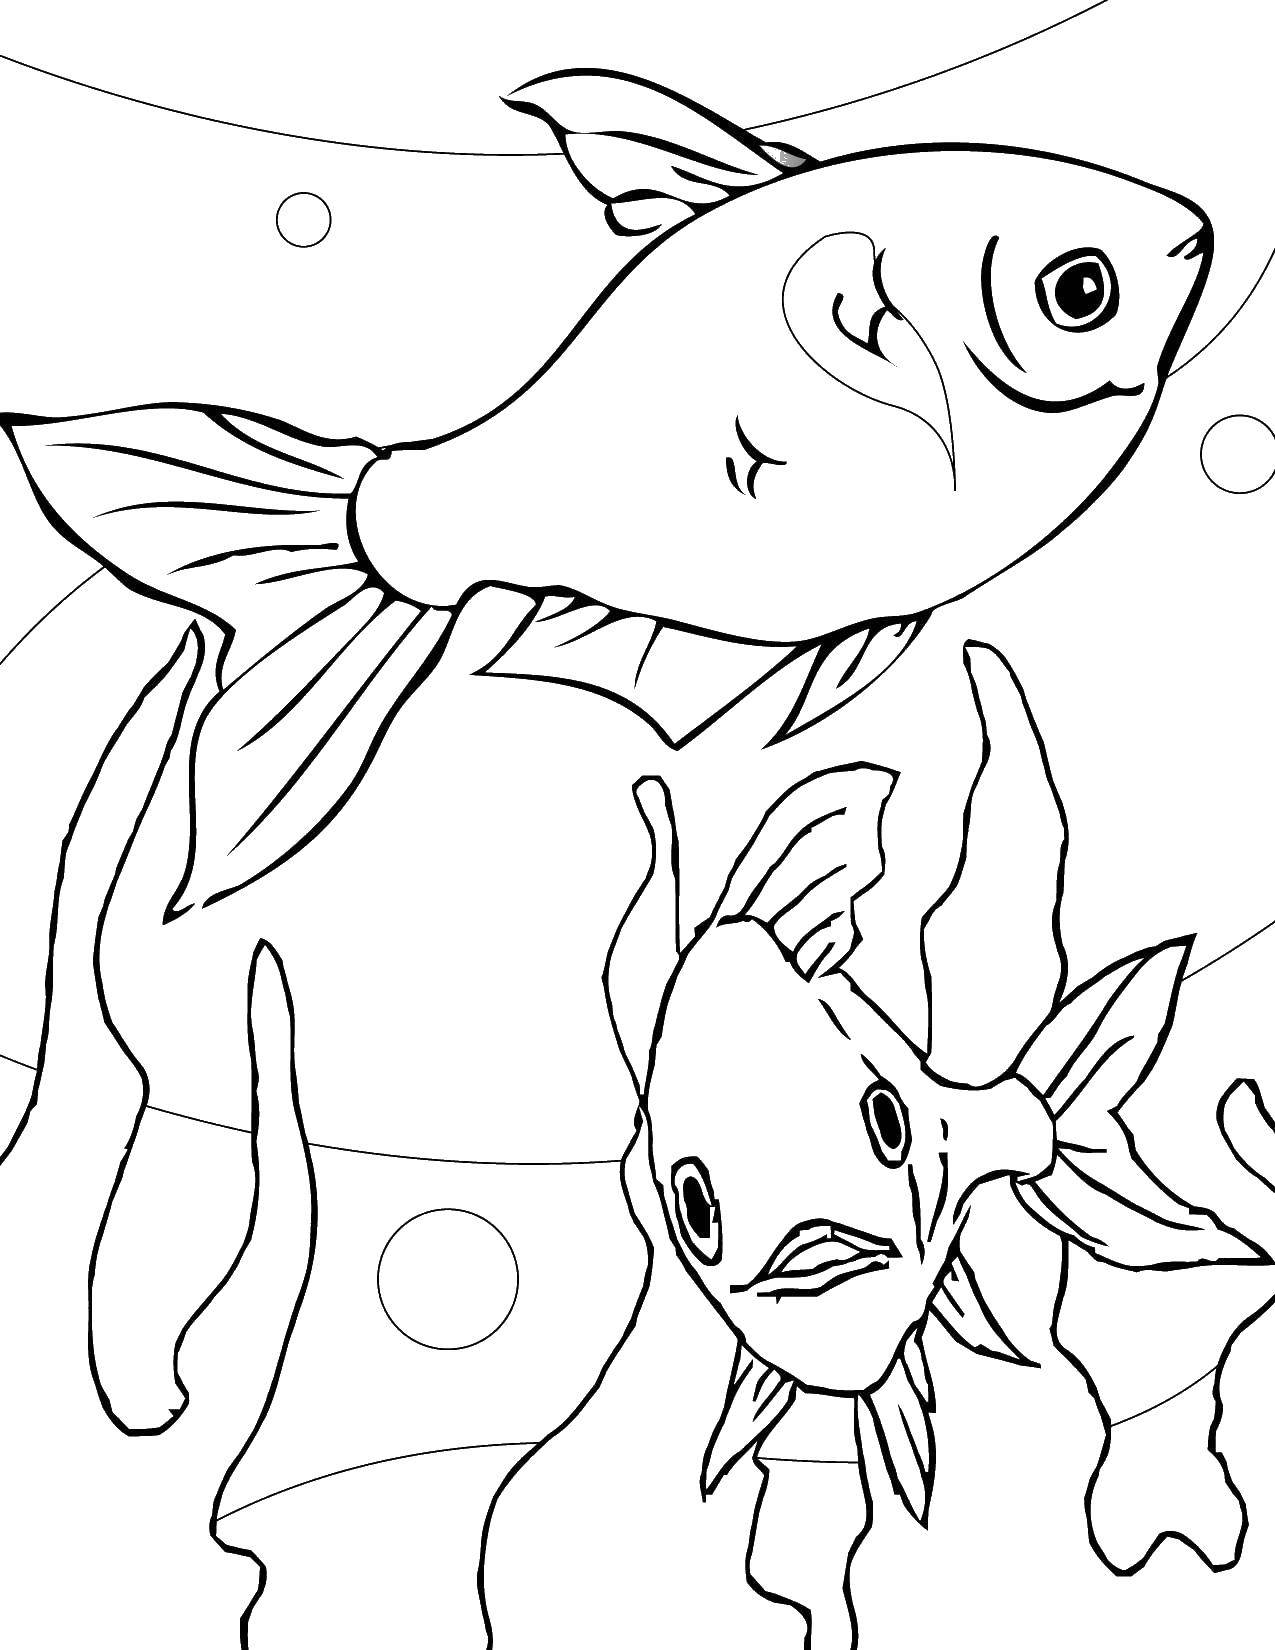 Coloring Fishes in the water. Category fish. Tags:  fish, water.